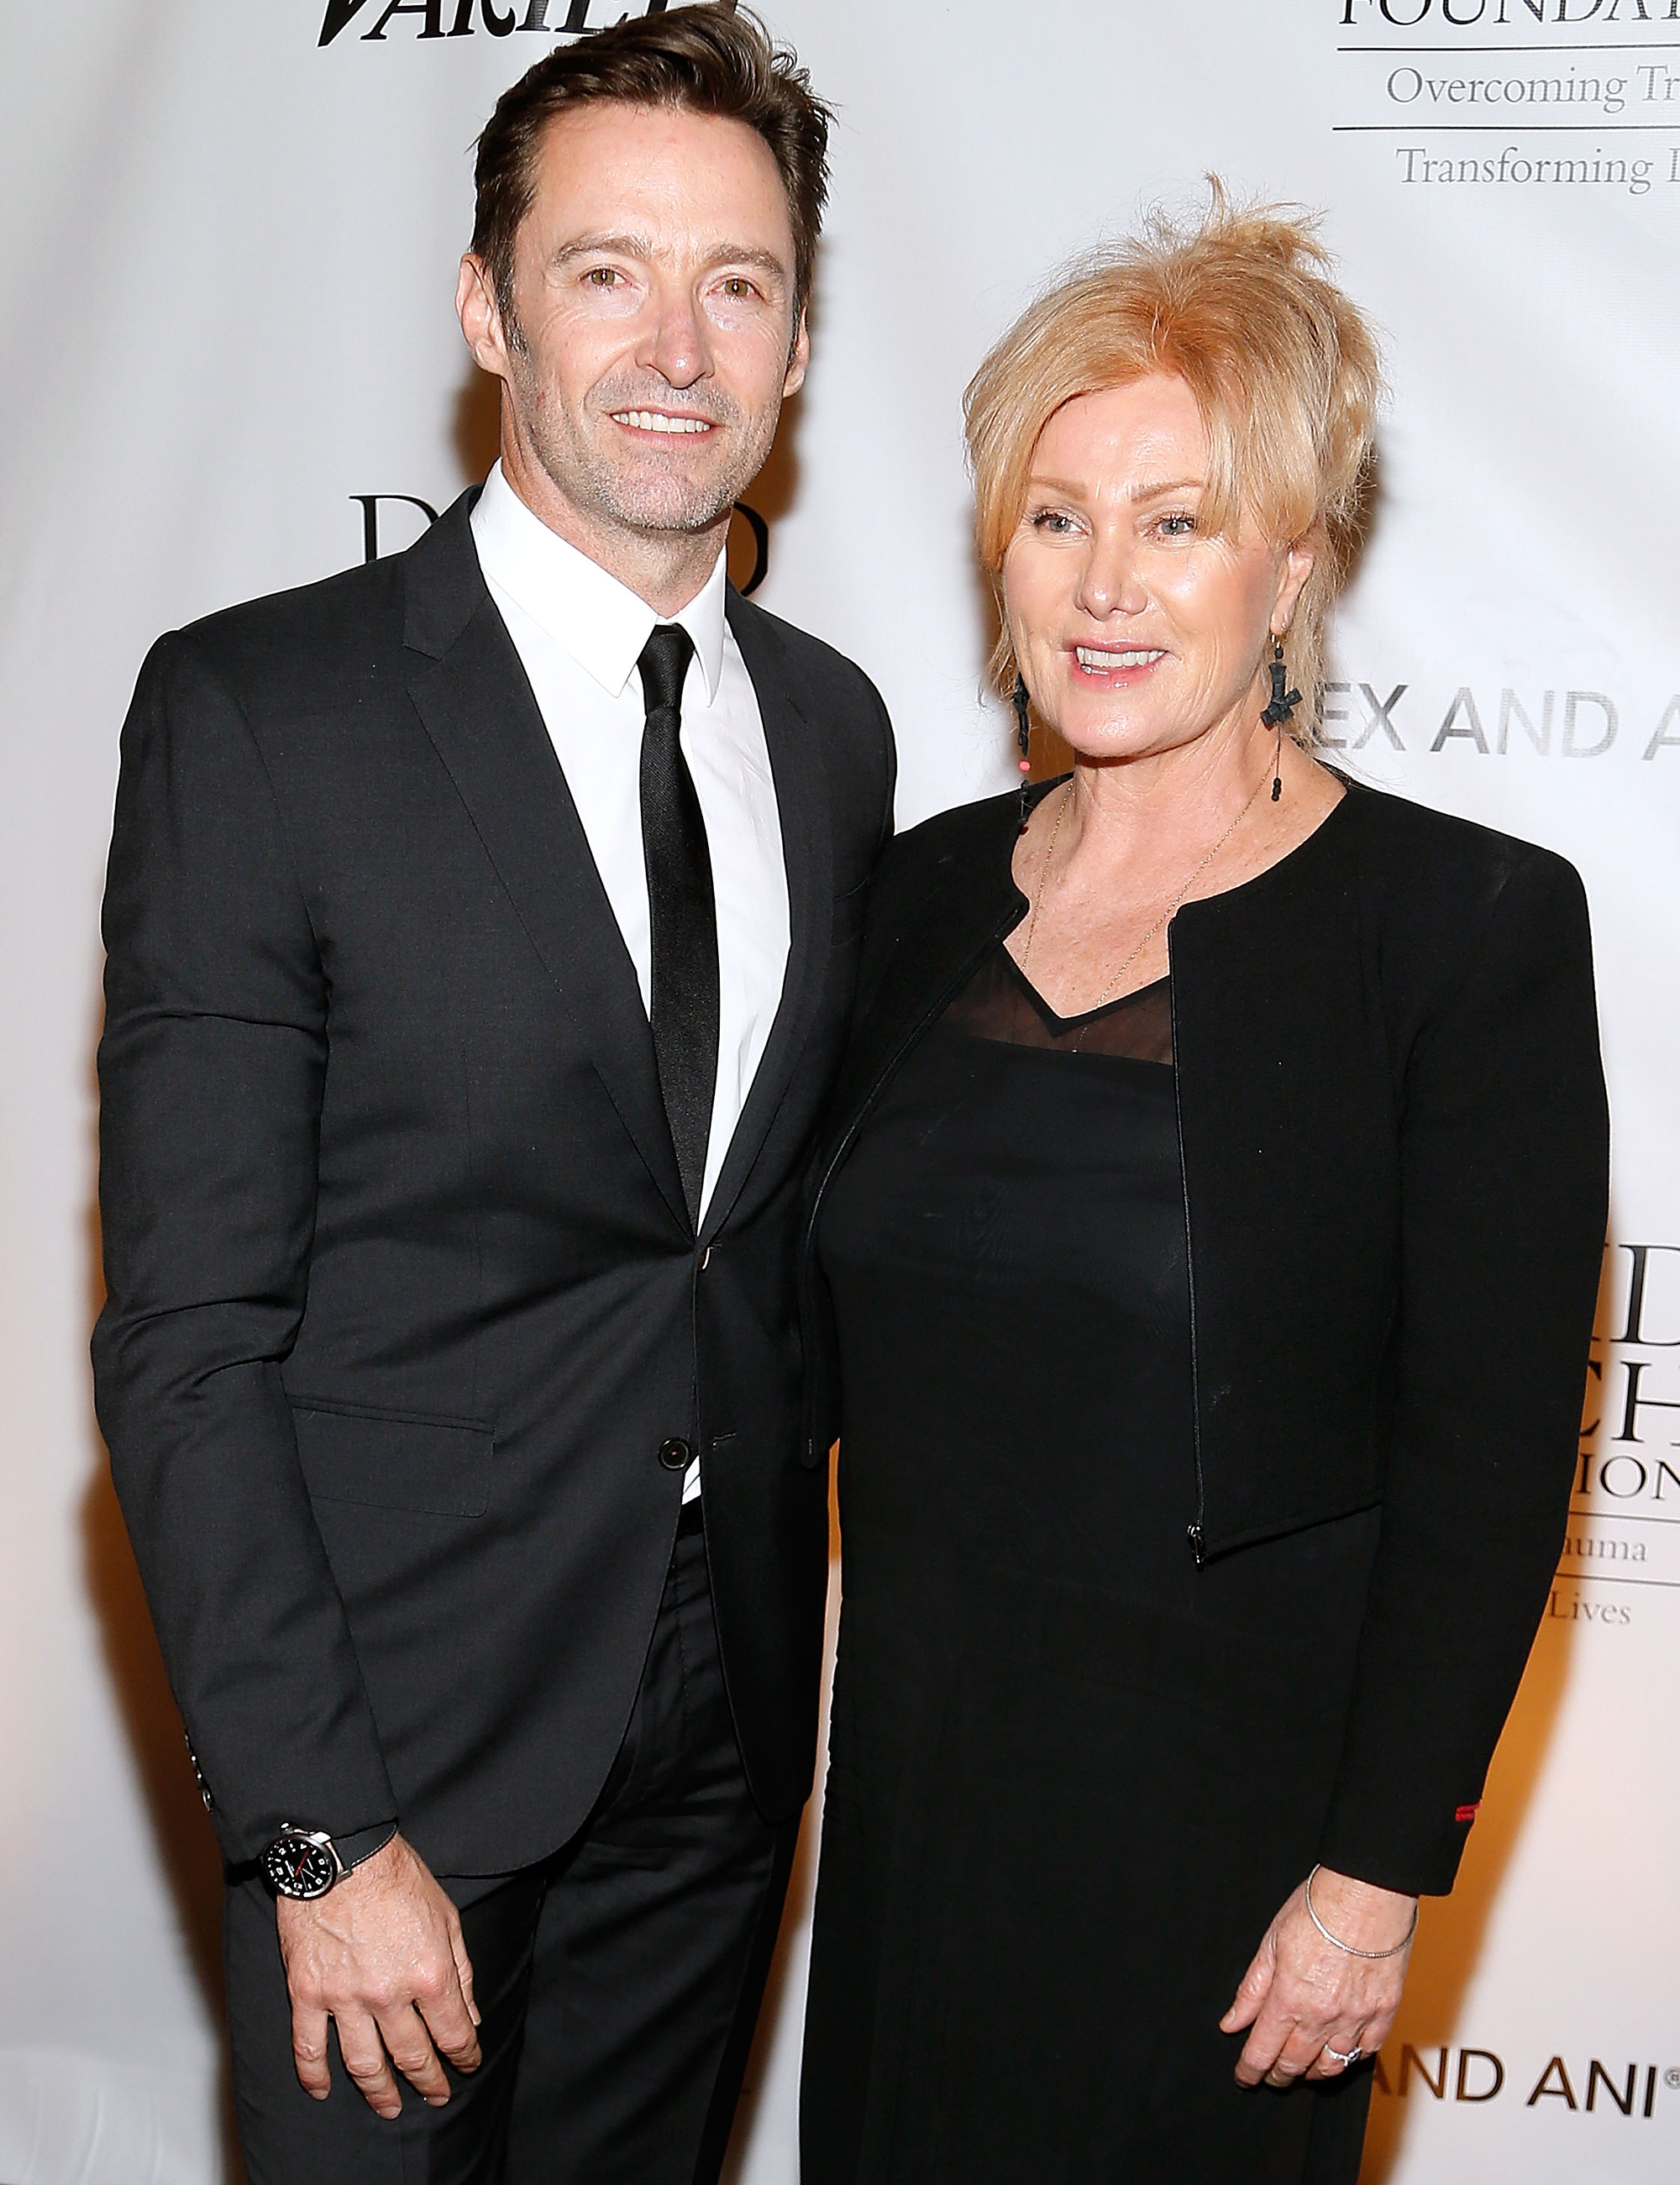 WASHINGTON, DC - JUNE 05:  Hugh Jackman (L) and Deborra-Lee Furness attend the National Night of Laughter and Song event hosted by David Lynch Foundation at the John F. Kennedy Center for the Performing Arts on June 5, 2017 in Washington, DC.  (Photo by Paul Morigi/WireImage) (Paul Morigi—WireImage)